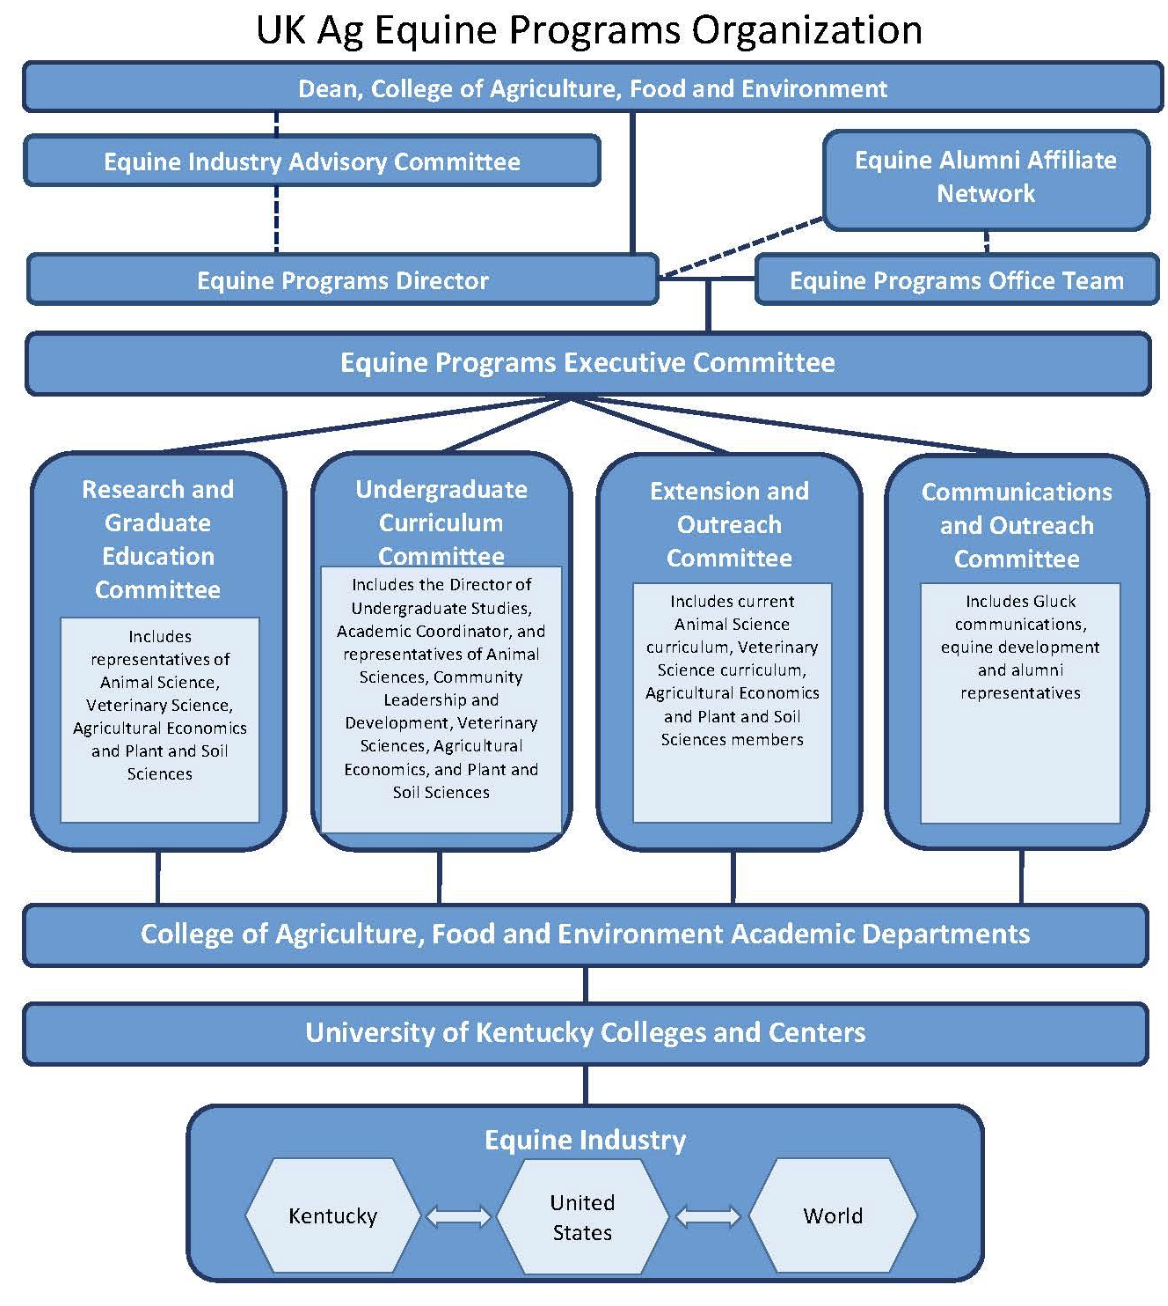 Organizational Structure of UK Ag Equine Programs